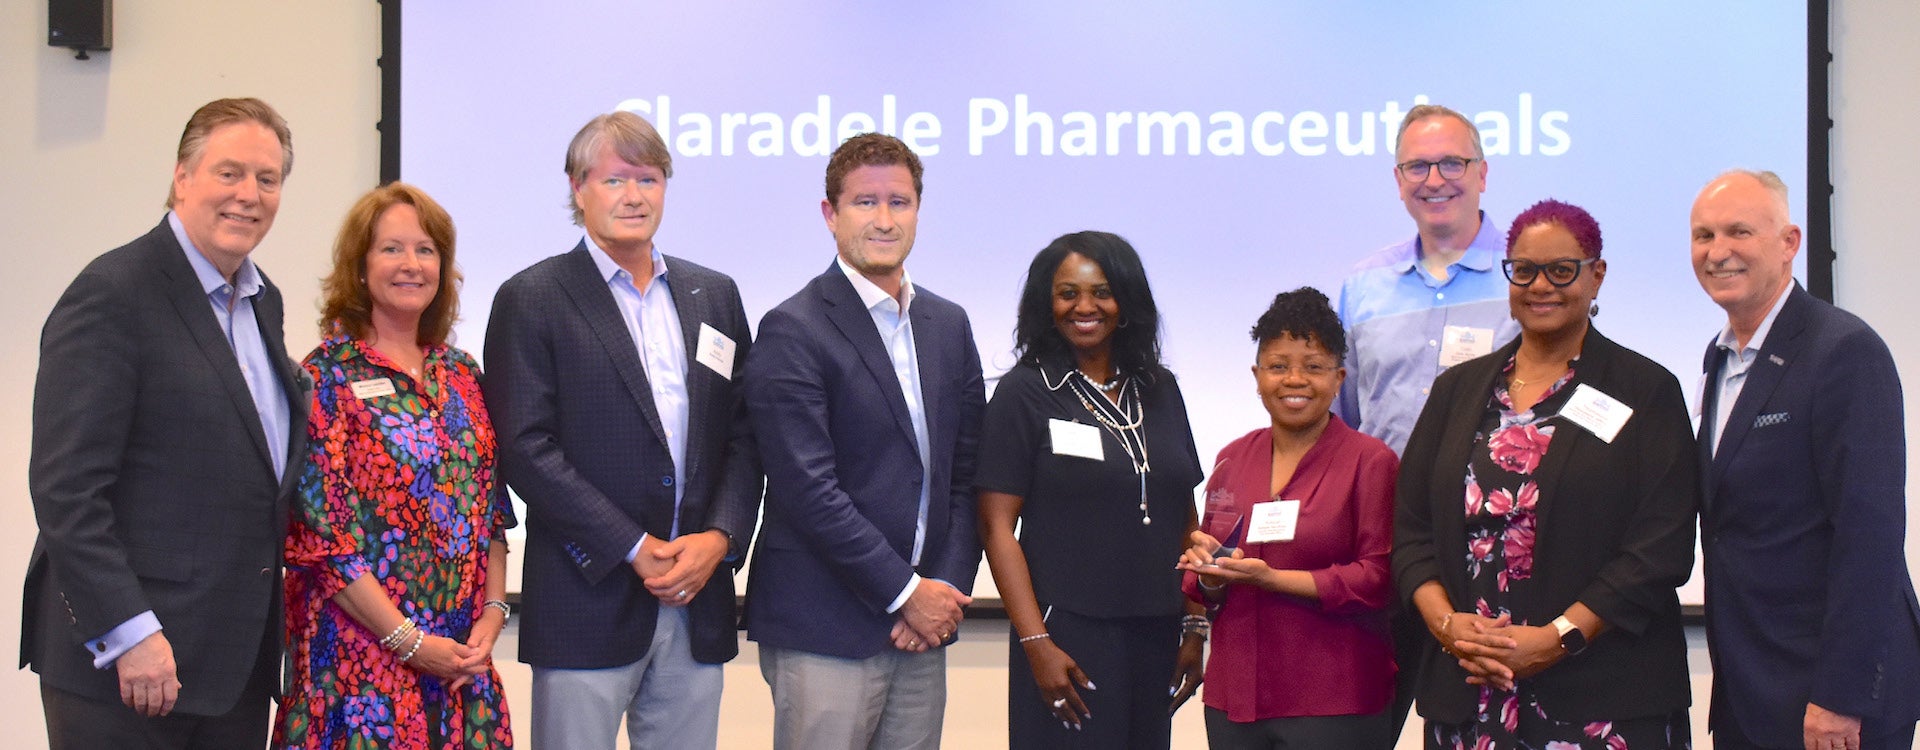 Dr. Rukiyah Van Dross-Anderson with her business partner, Dr. Colin Burns, challenge judges and NC Biotechnology Center representatives. (Photo by Kim Tilghman)